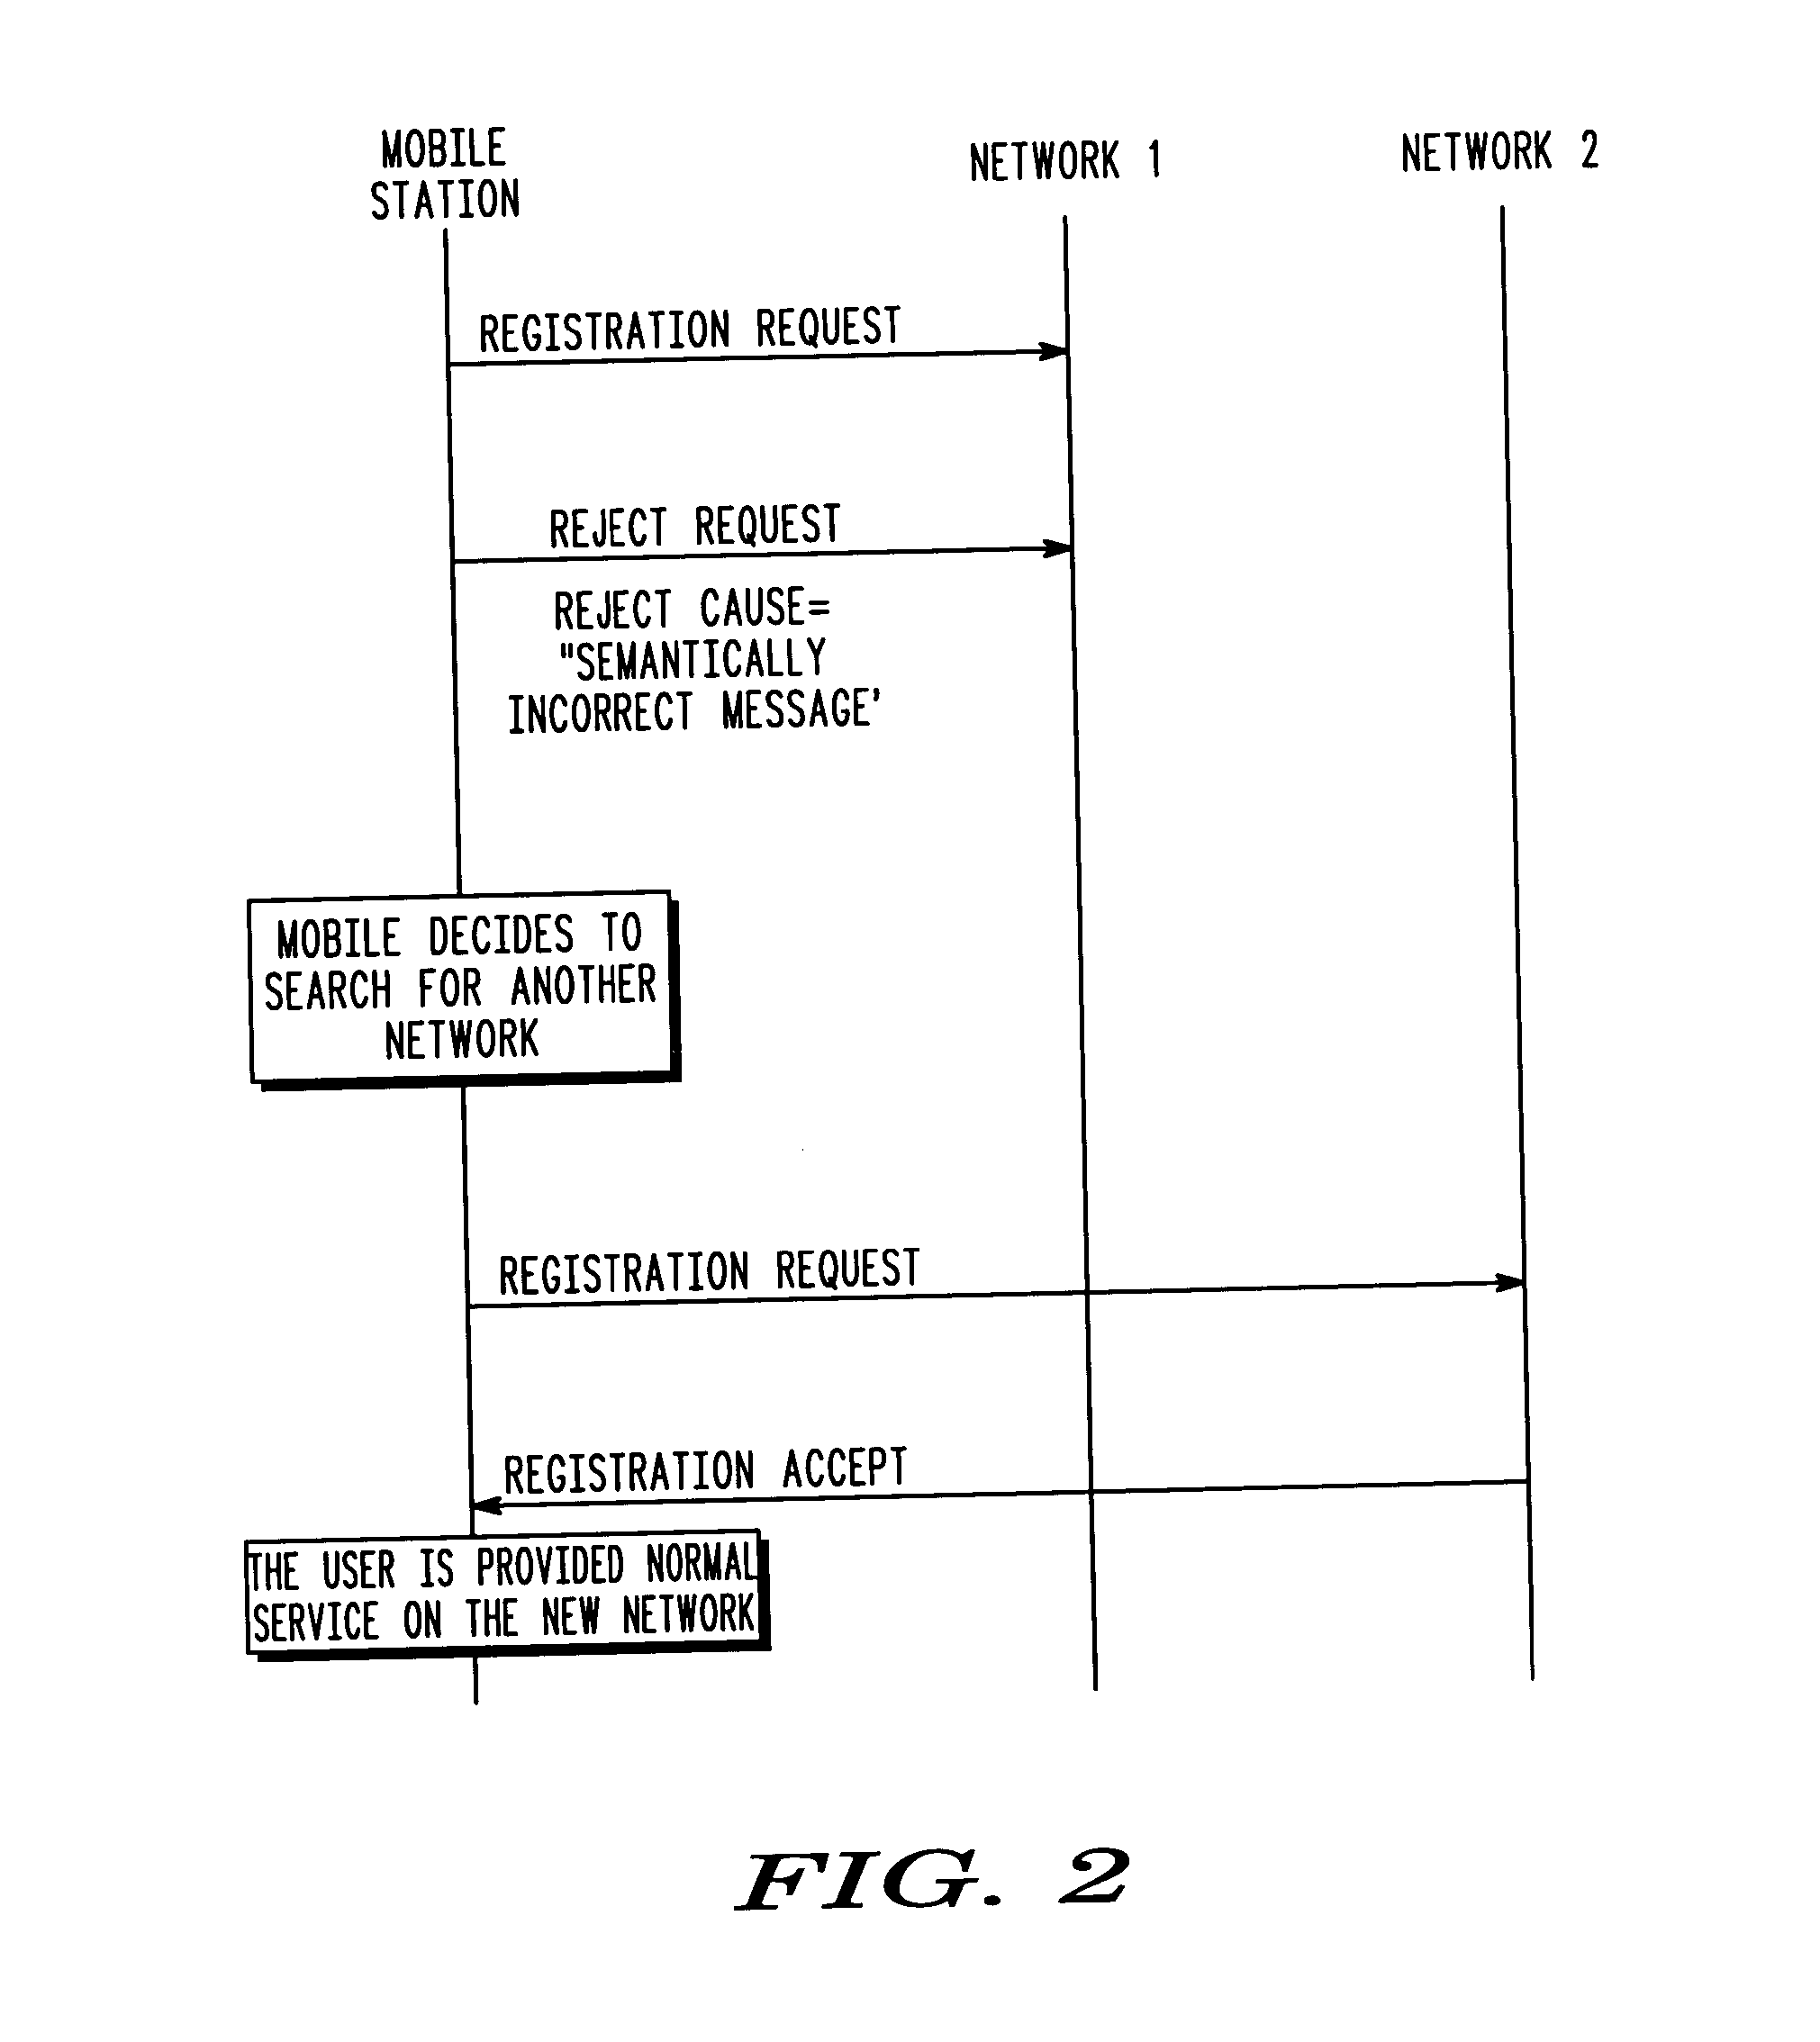 Method for a communication device to search for an alternate network upon a registration failure